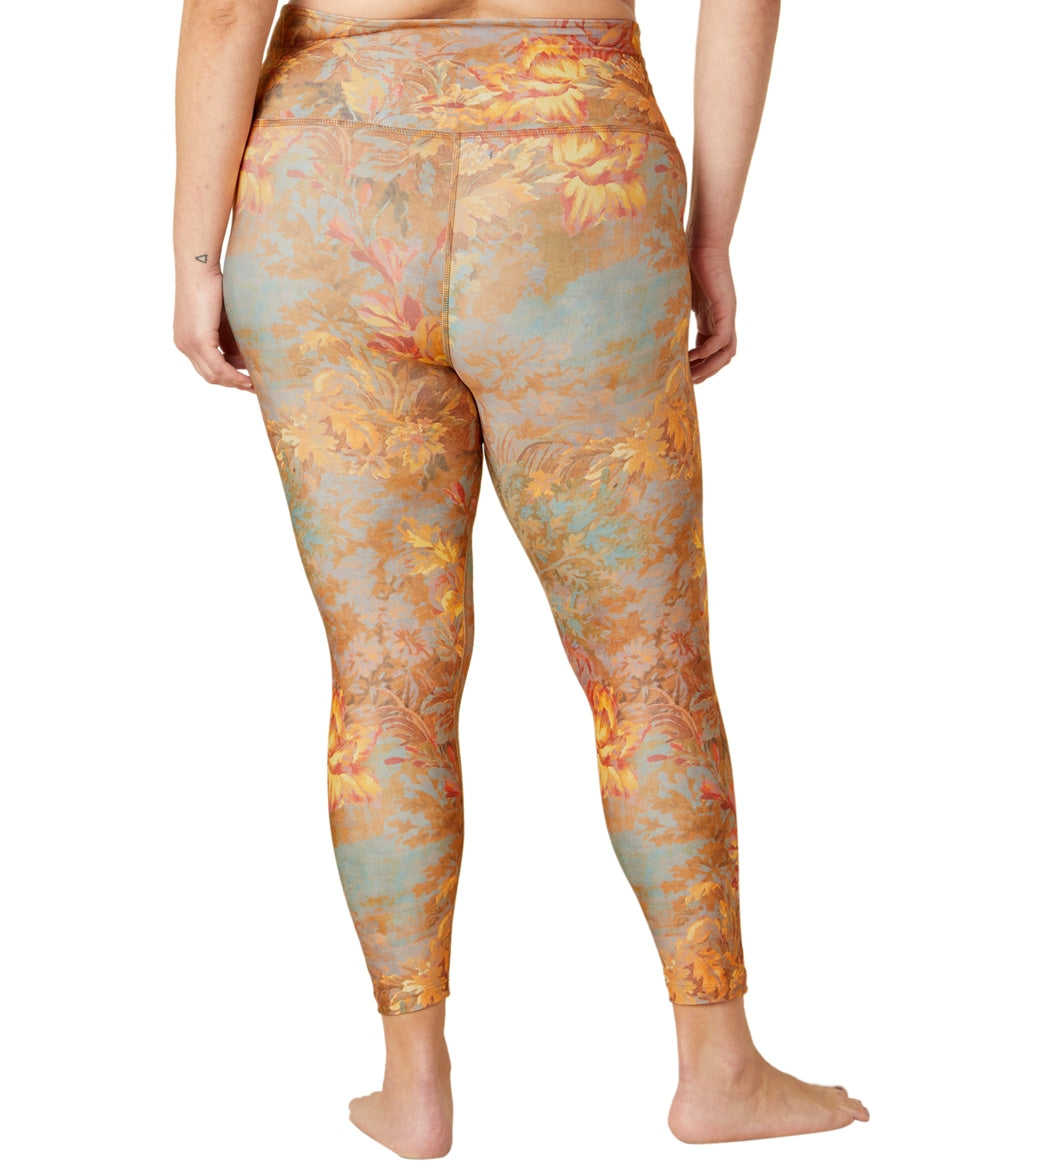 High Waisted Waffle Styled Active Women's Leggings Printed Yoga